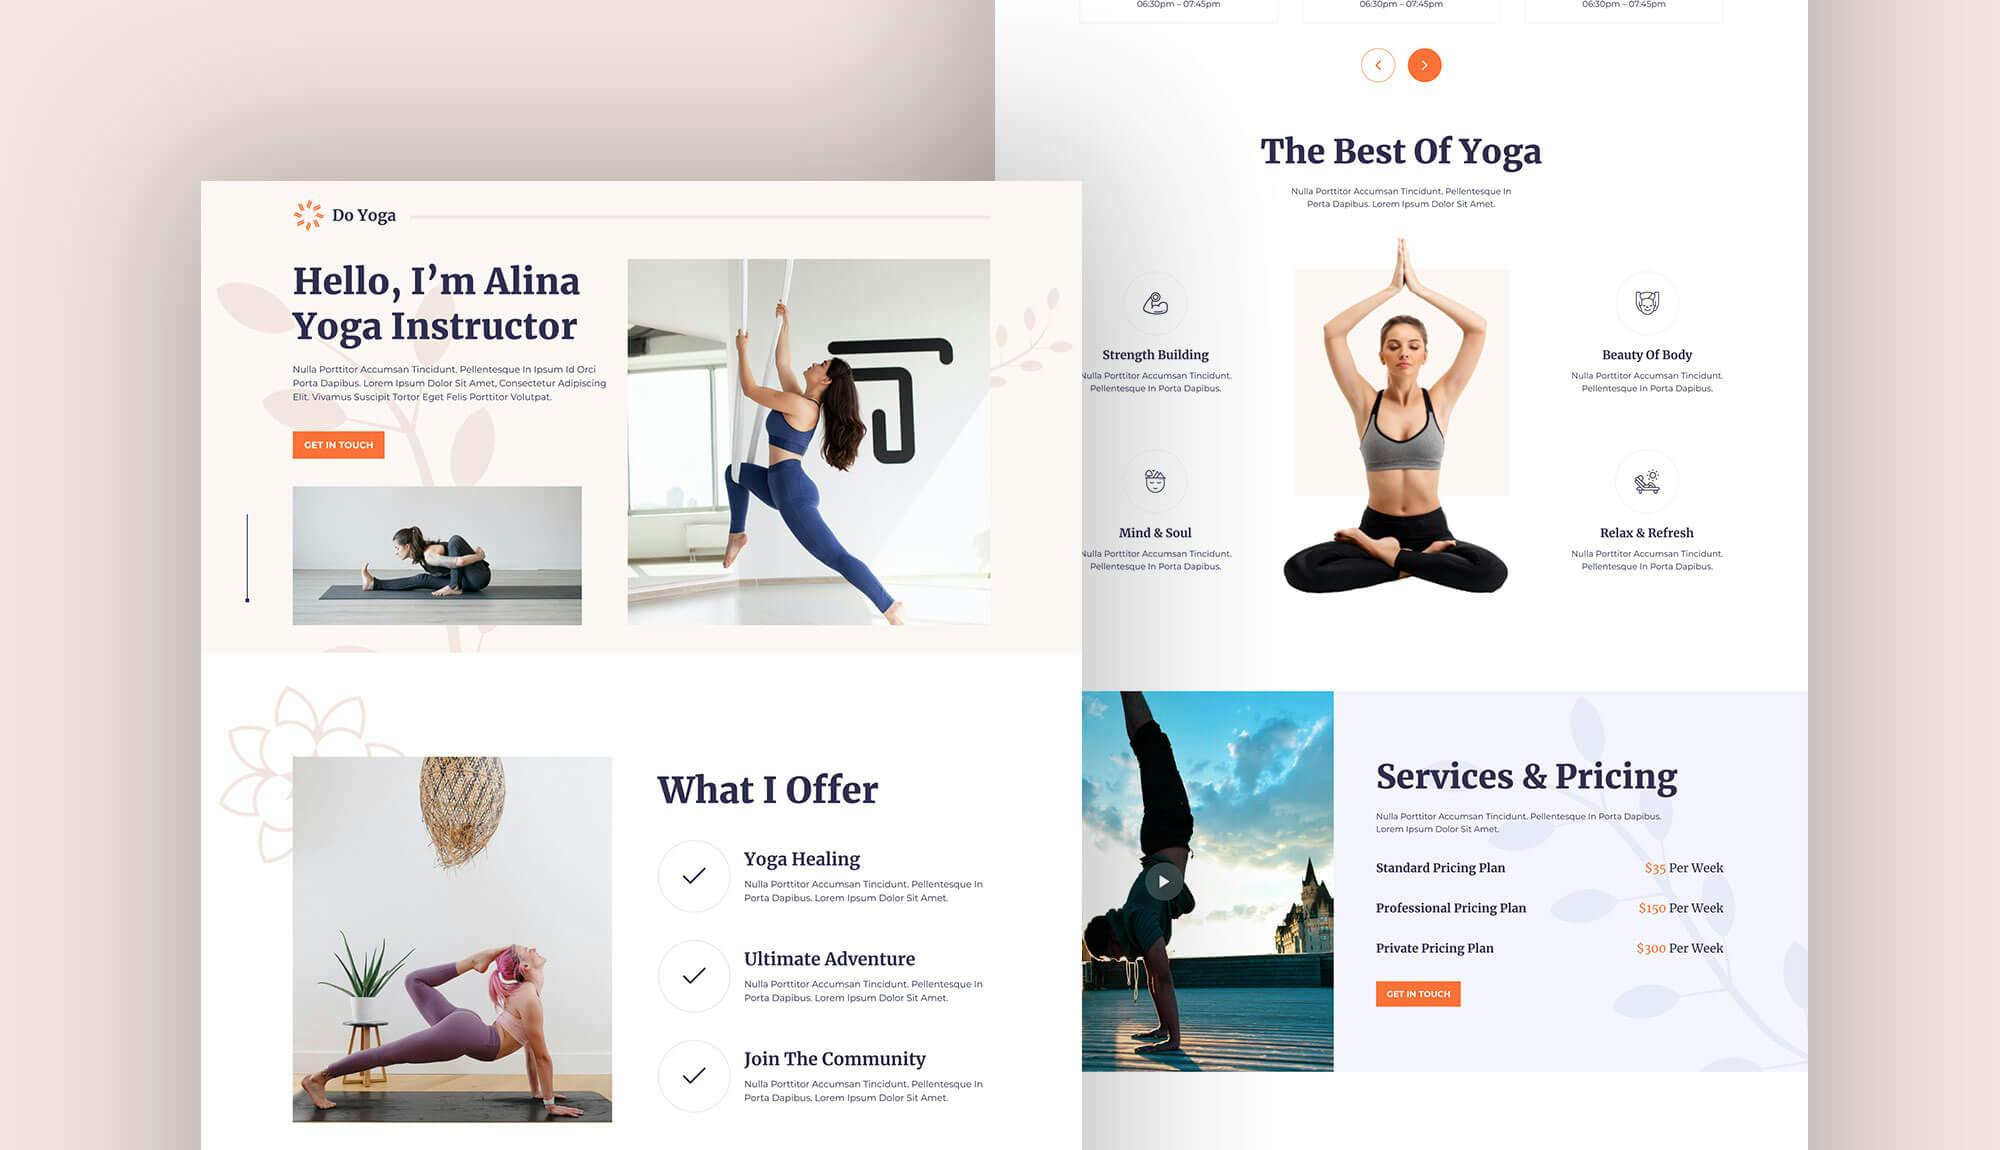 Do Yoga - Yoga Instructor Personal Website Template Banner